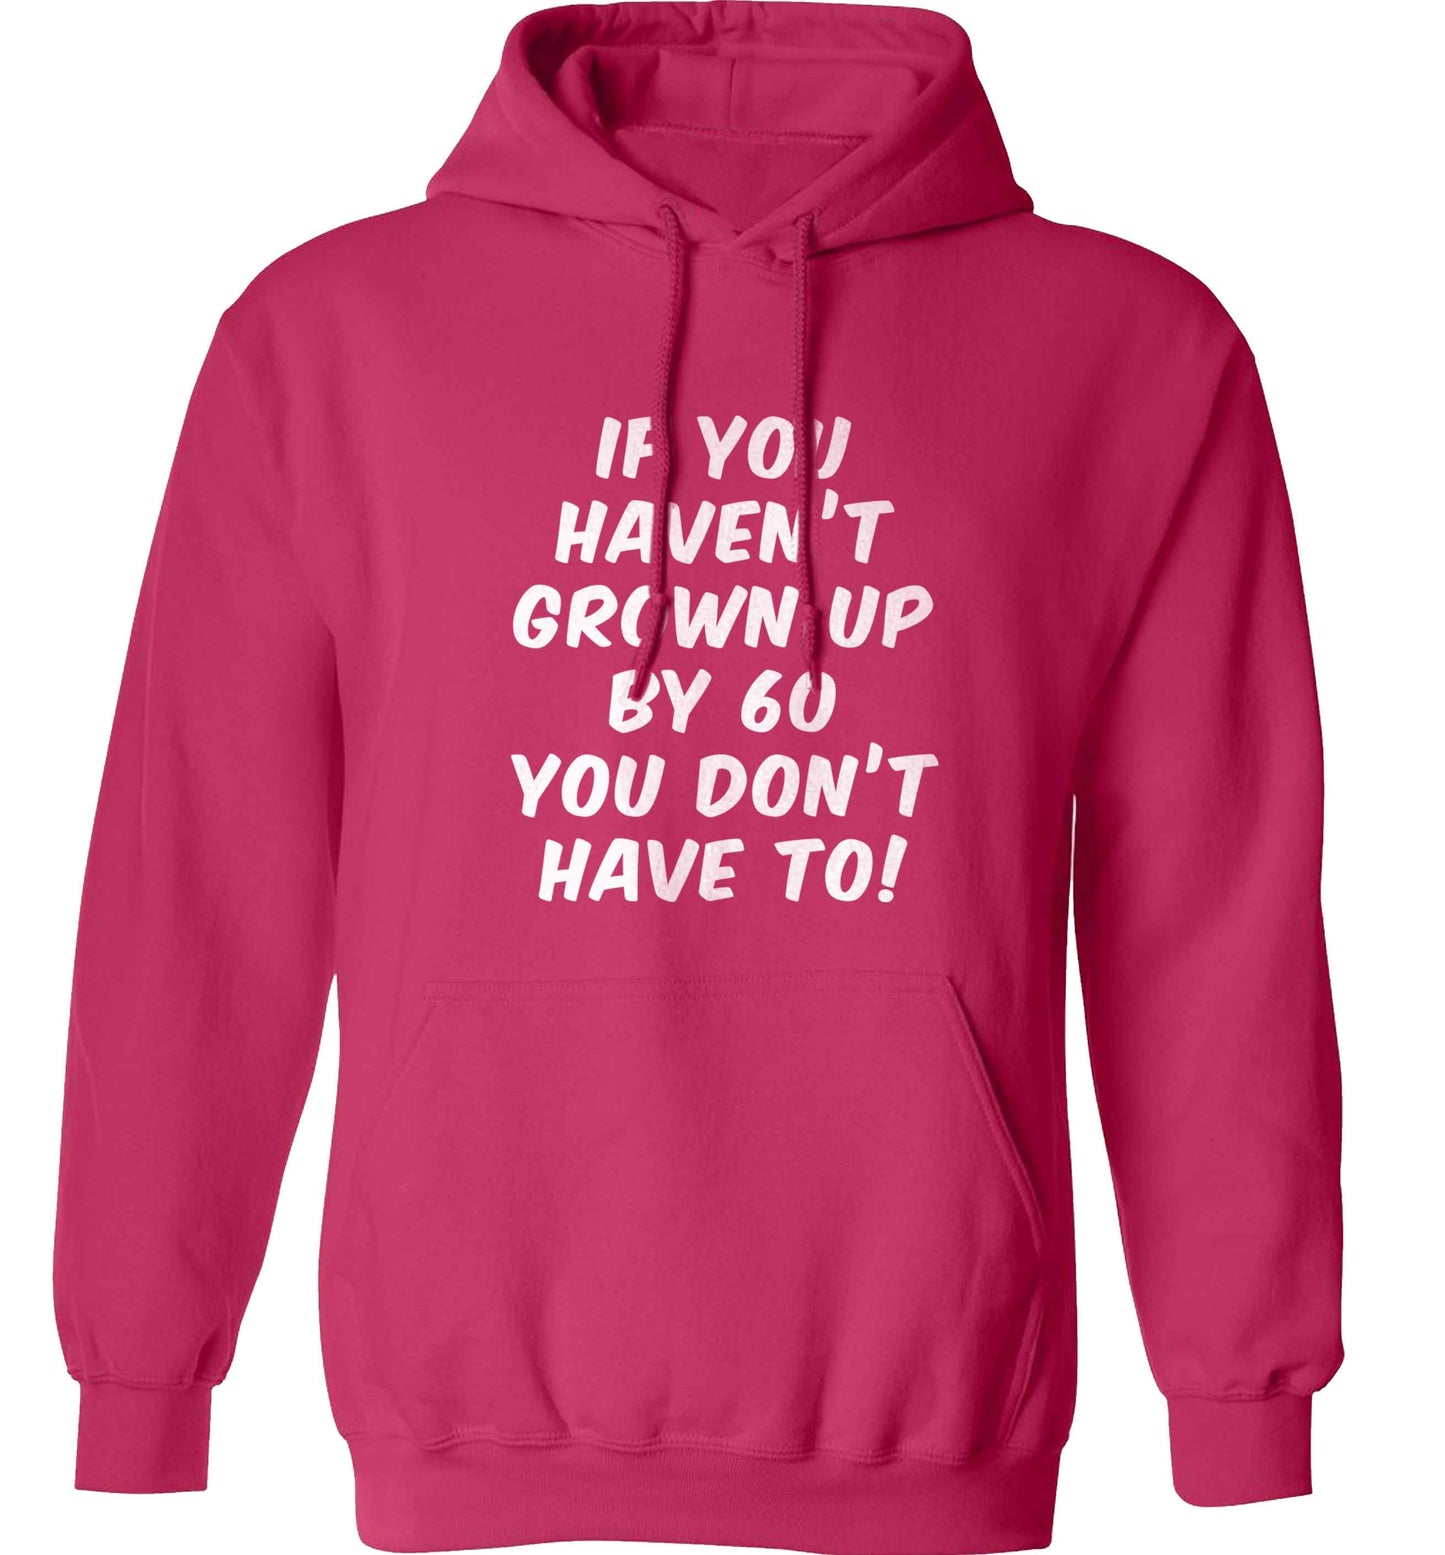 If you haven't grown up by sixty you don't have to adults unisex pink hoodie 2XL